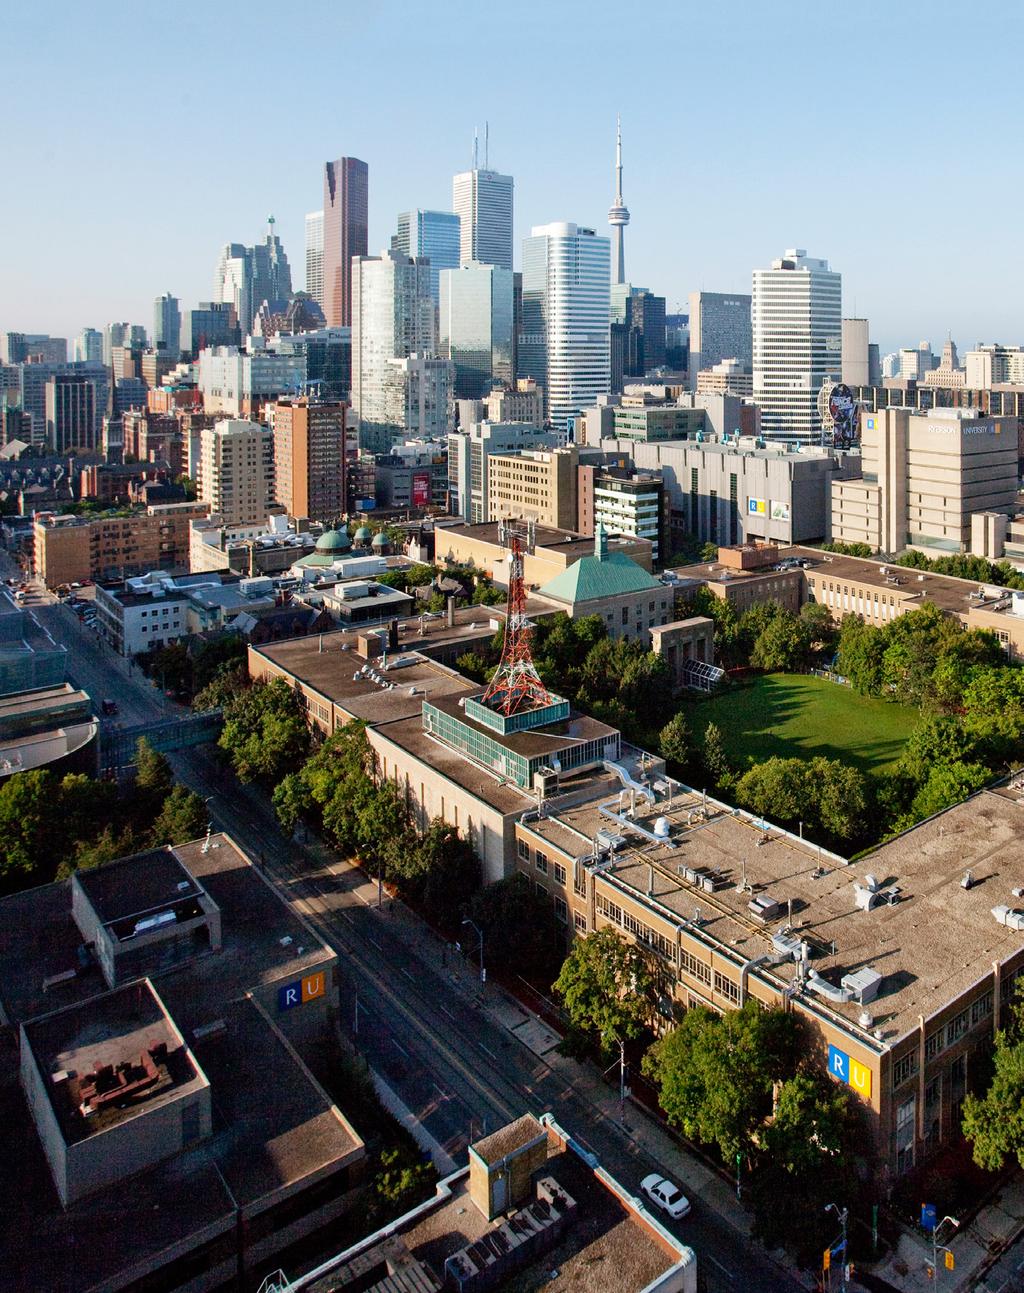 The campus within the city Commercial and retail district Take advantage of the strategic location of Ryerson University, and its demands and opportunities within the city s urban context.